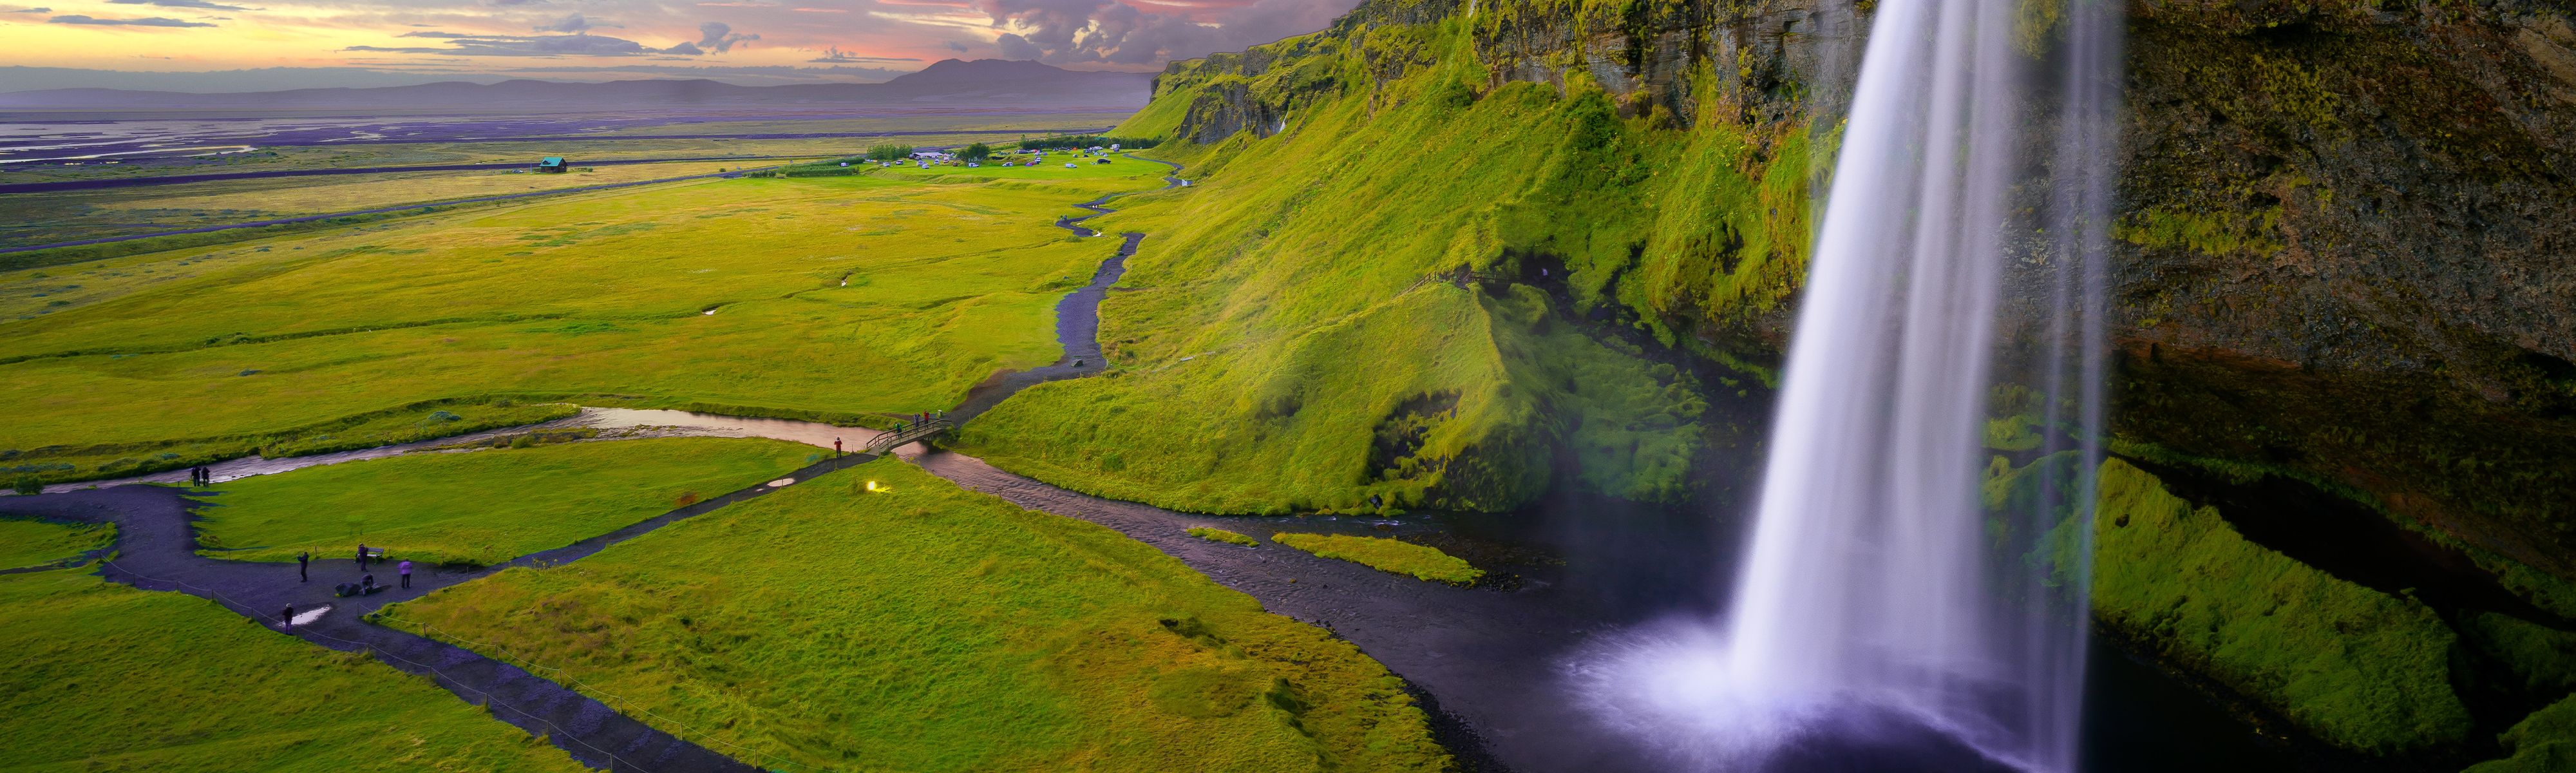 waterfall cascading over green lush landscapes in iceland